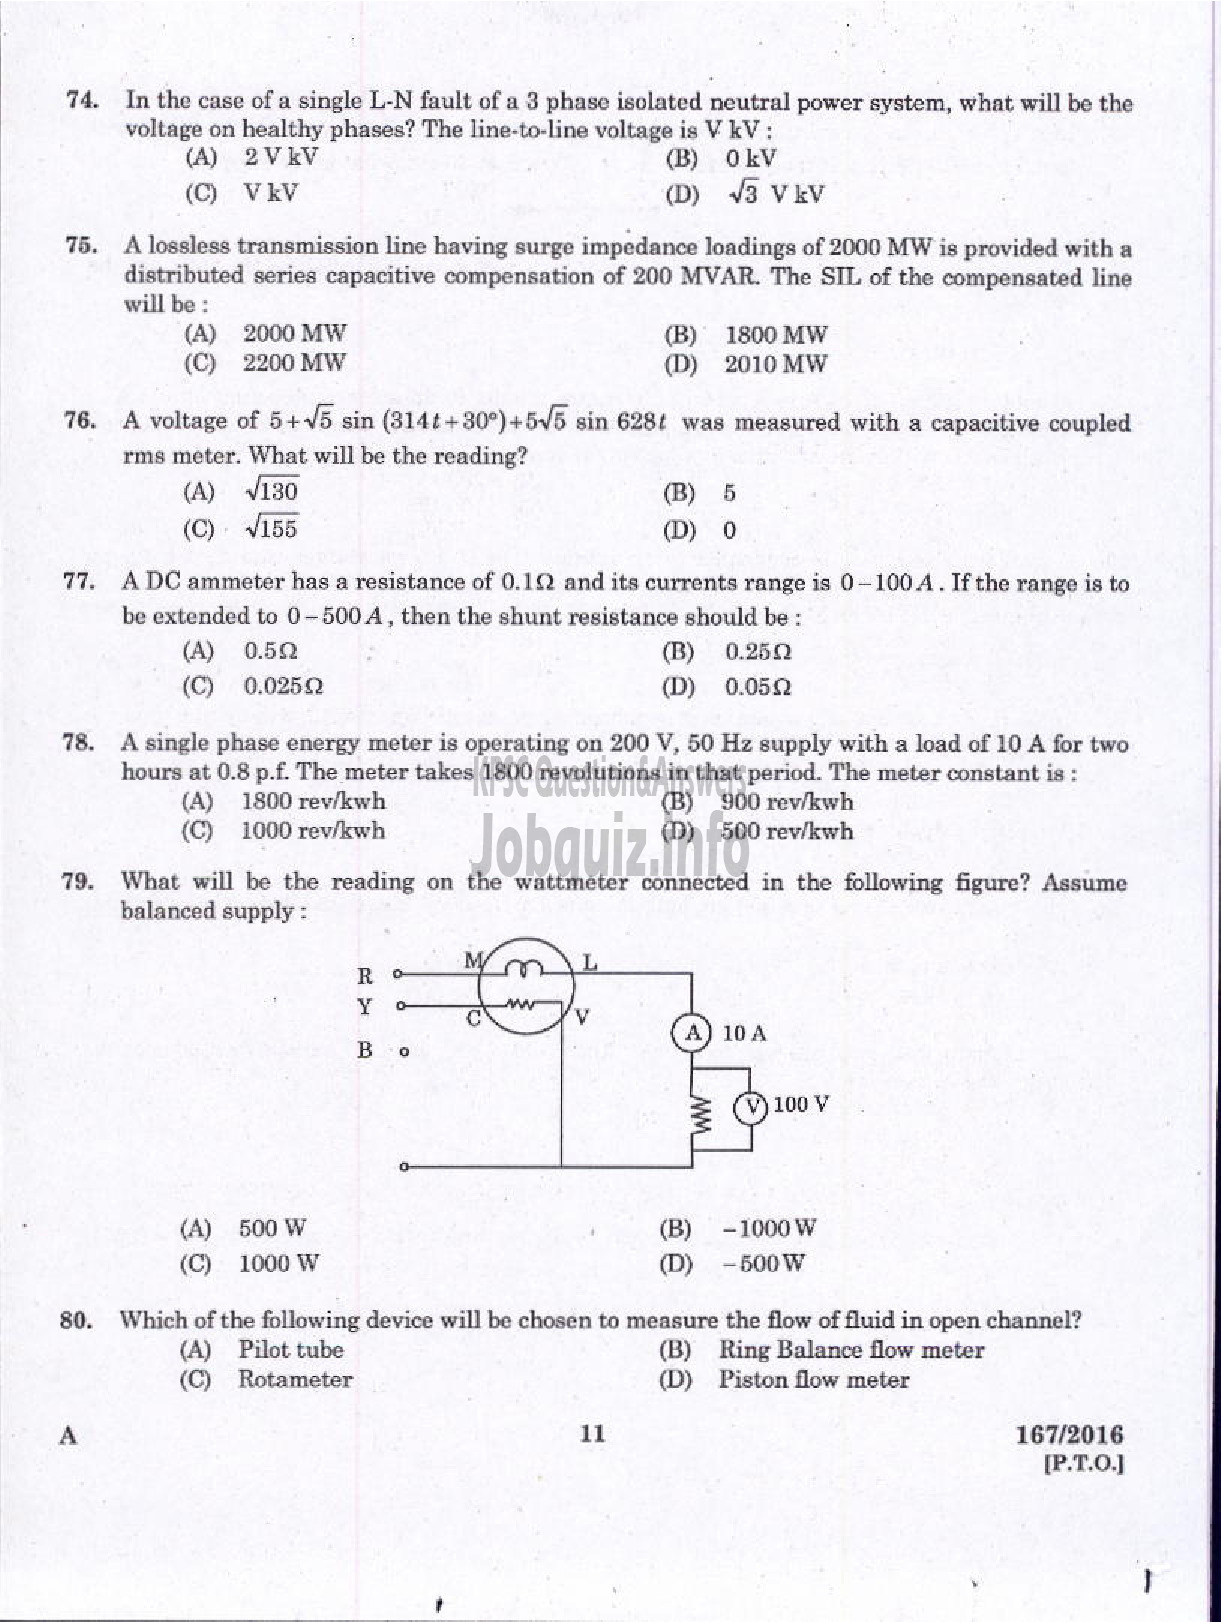 Kerala PSC Question Paper - LECTURER IN ELECTRICAL AND ELECTRONICS ENGINEERING GOVST POLYTECHNICS TECHNICAL EDUCATION-9